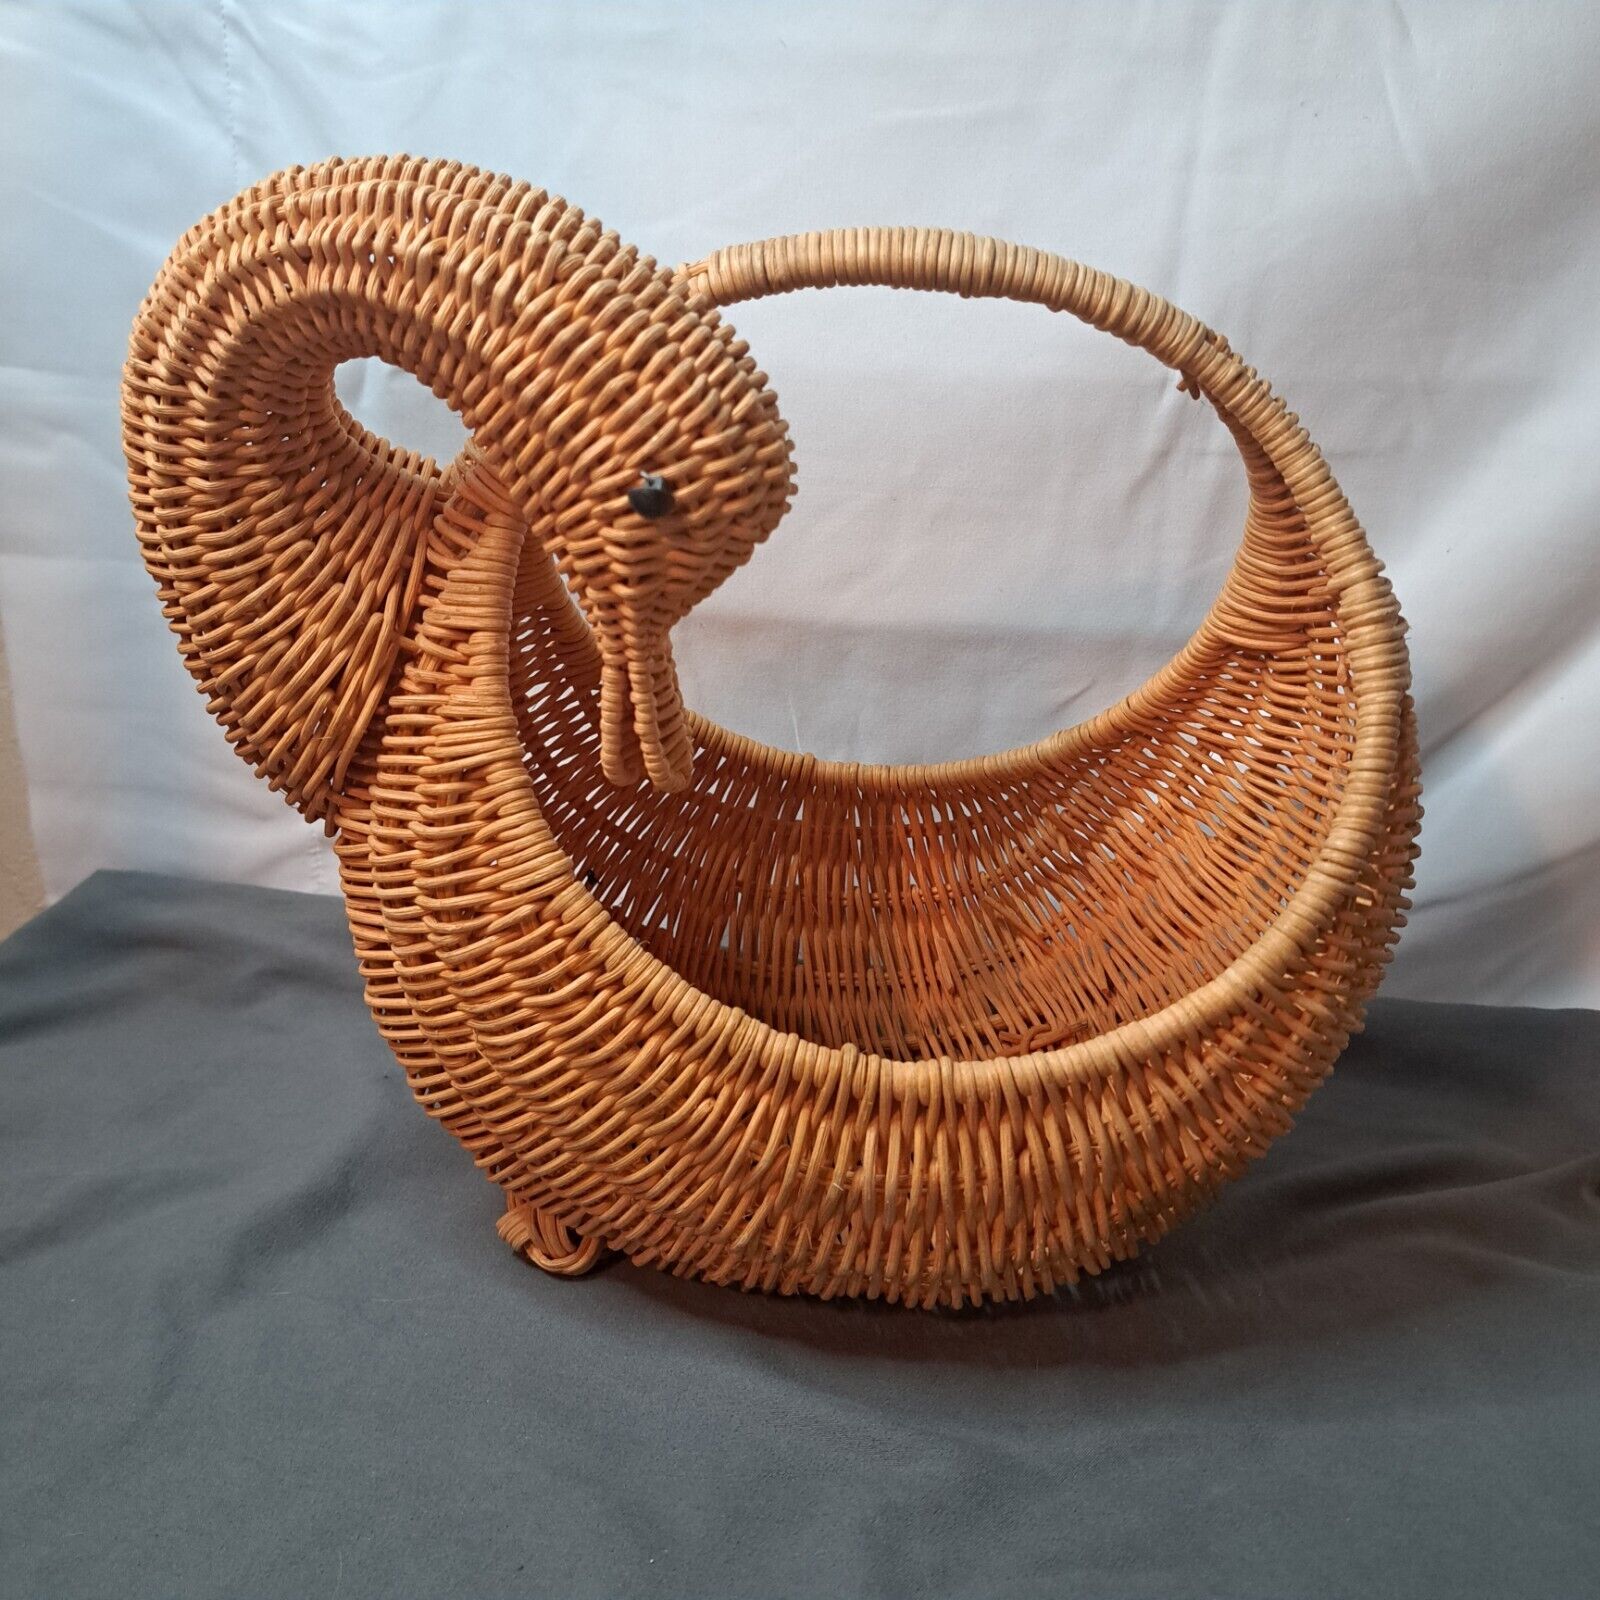 Vintage Swan Duck Wicker Basket with Handle Brown Egg Easter Hunting Home Decor